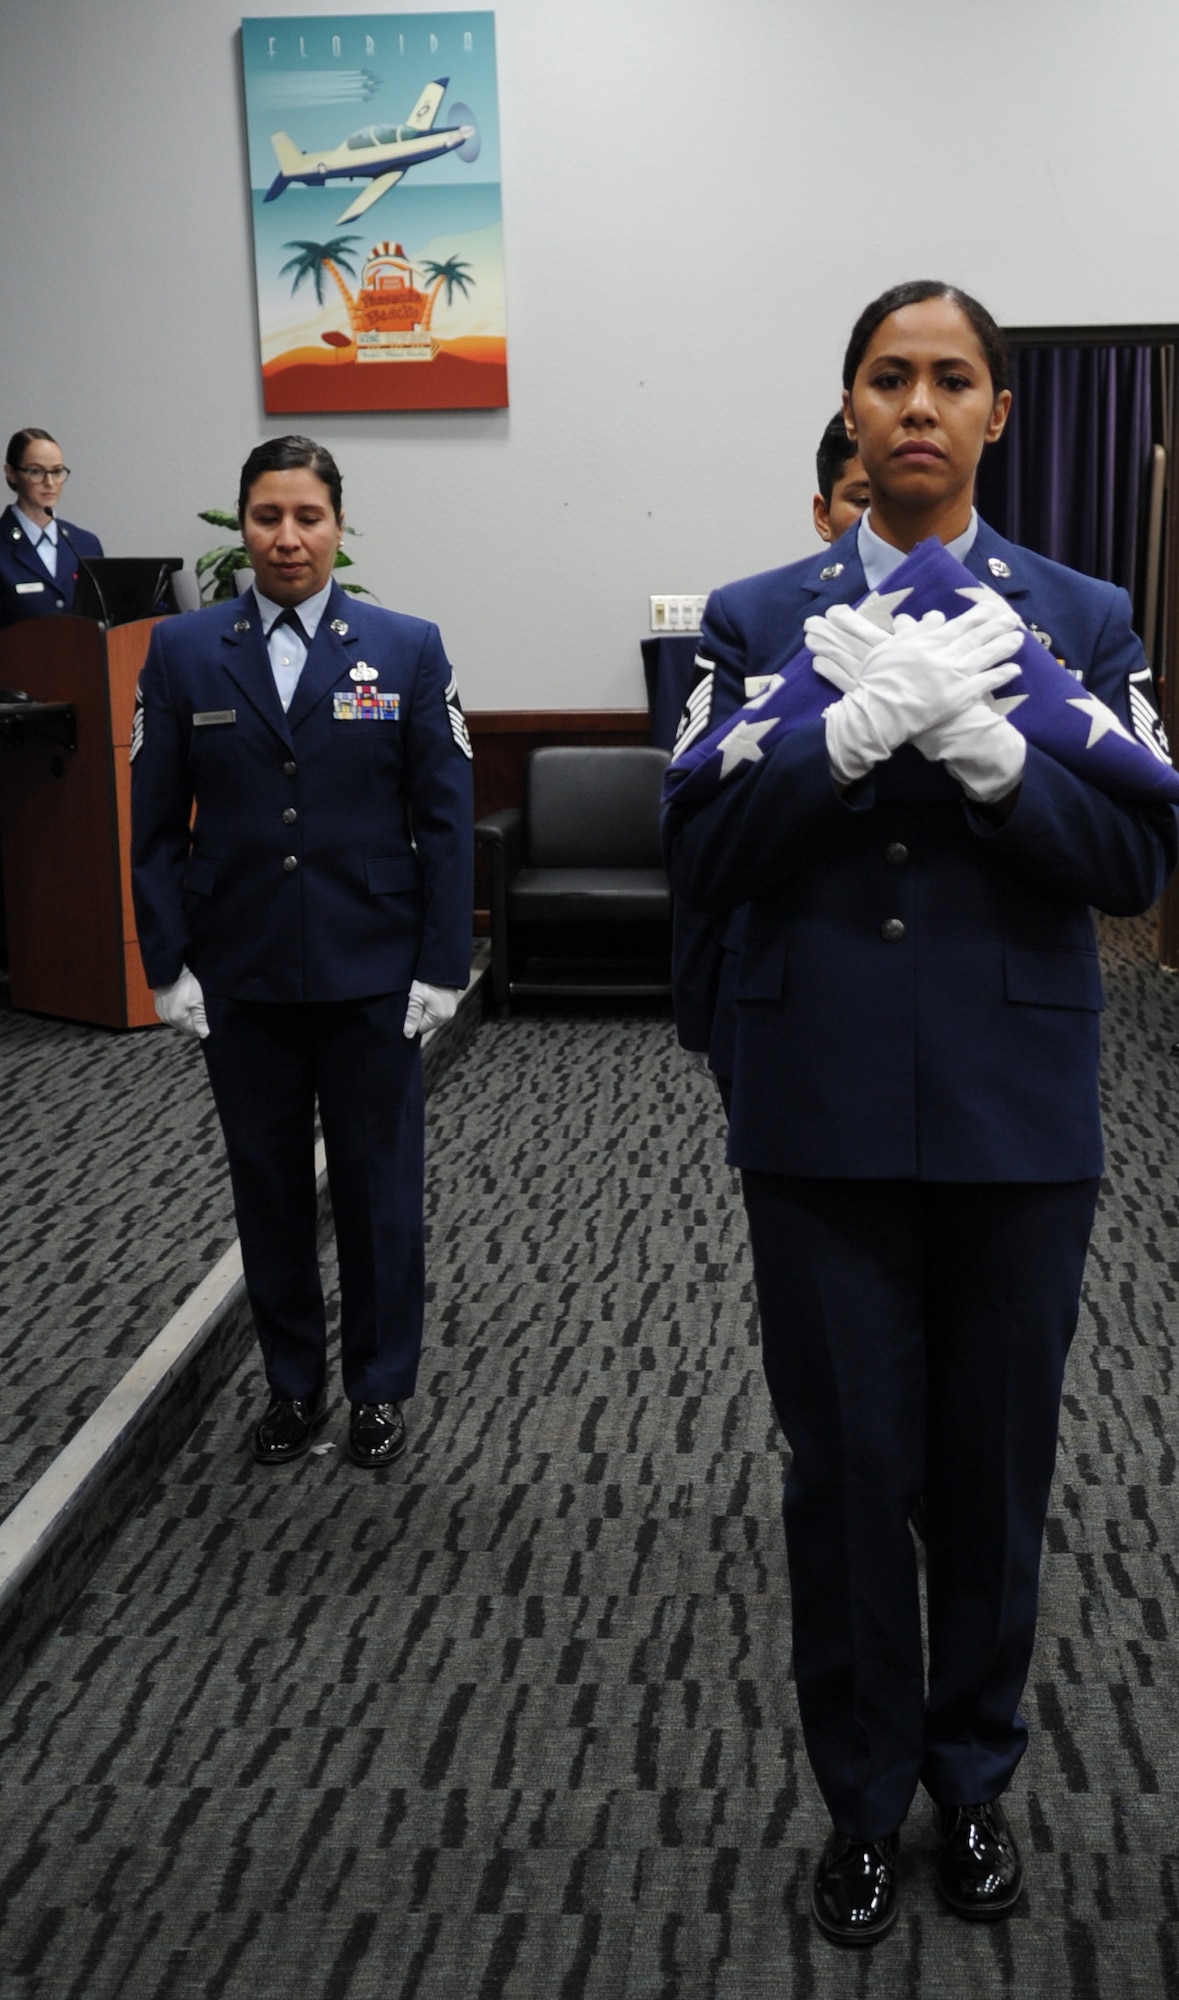 Master Sgt. Tainell Pettengill (front), 340th Flying Training Group Undergraduate Flying Training Program noncommissioned officer in charge, and former UFT NCOIC Senior Master Sgt. Vianca Contreras prepare for the U.S. flag folding ceremony during to Lt. Col. Timothy Chapman, former 340th FTG program manager, during Chapman's Aug. 29 retirement ceremony at Joint Base San Antonio-Randolph, Texas. Also part of the team was former UFT staff member Master Sgt. Digma Norris. Contreras and Norris, now assigned to different units, made the trip to JBSA-Randolph to honor their former boss. (U.S. Air Force photo by Debbie Gildea)